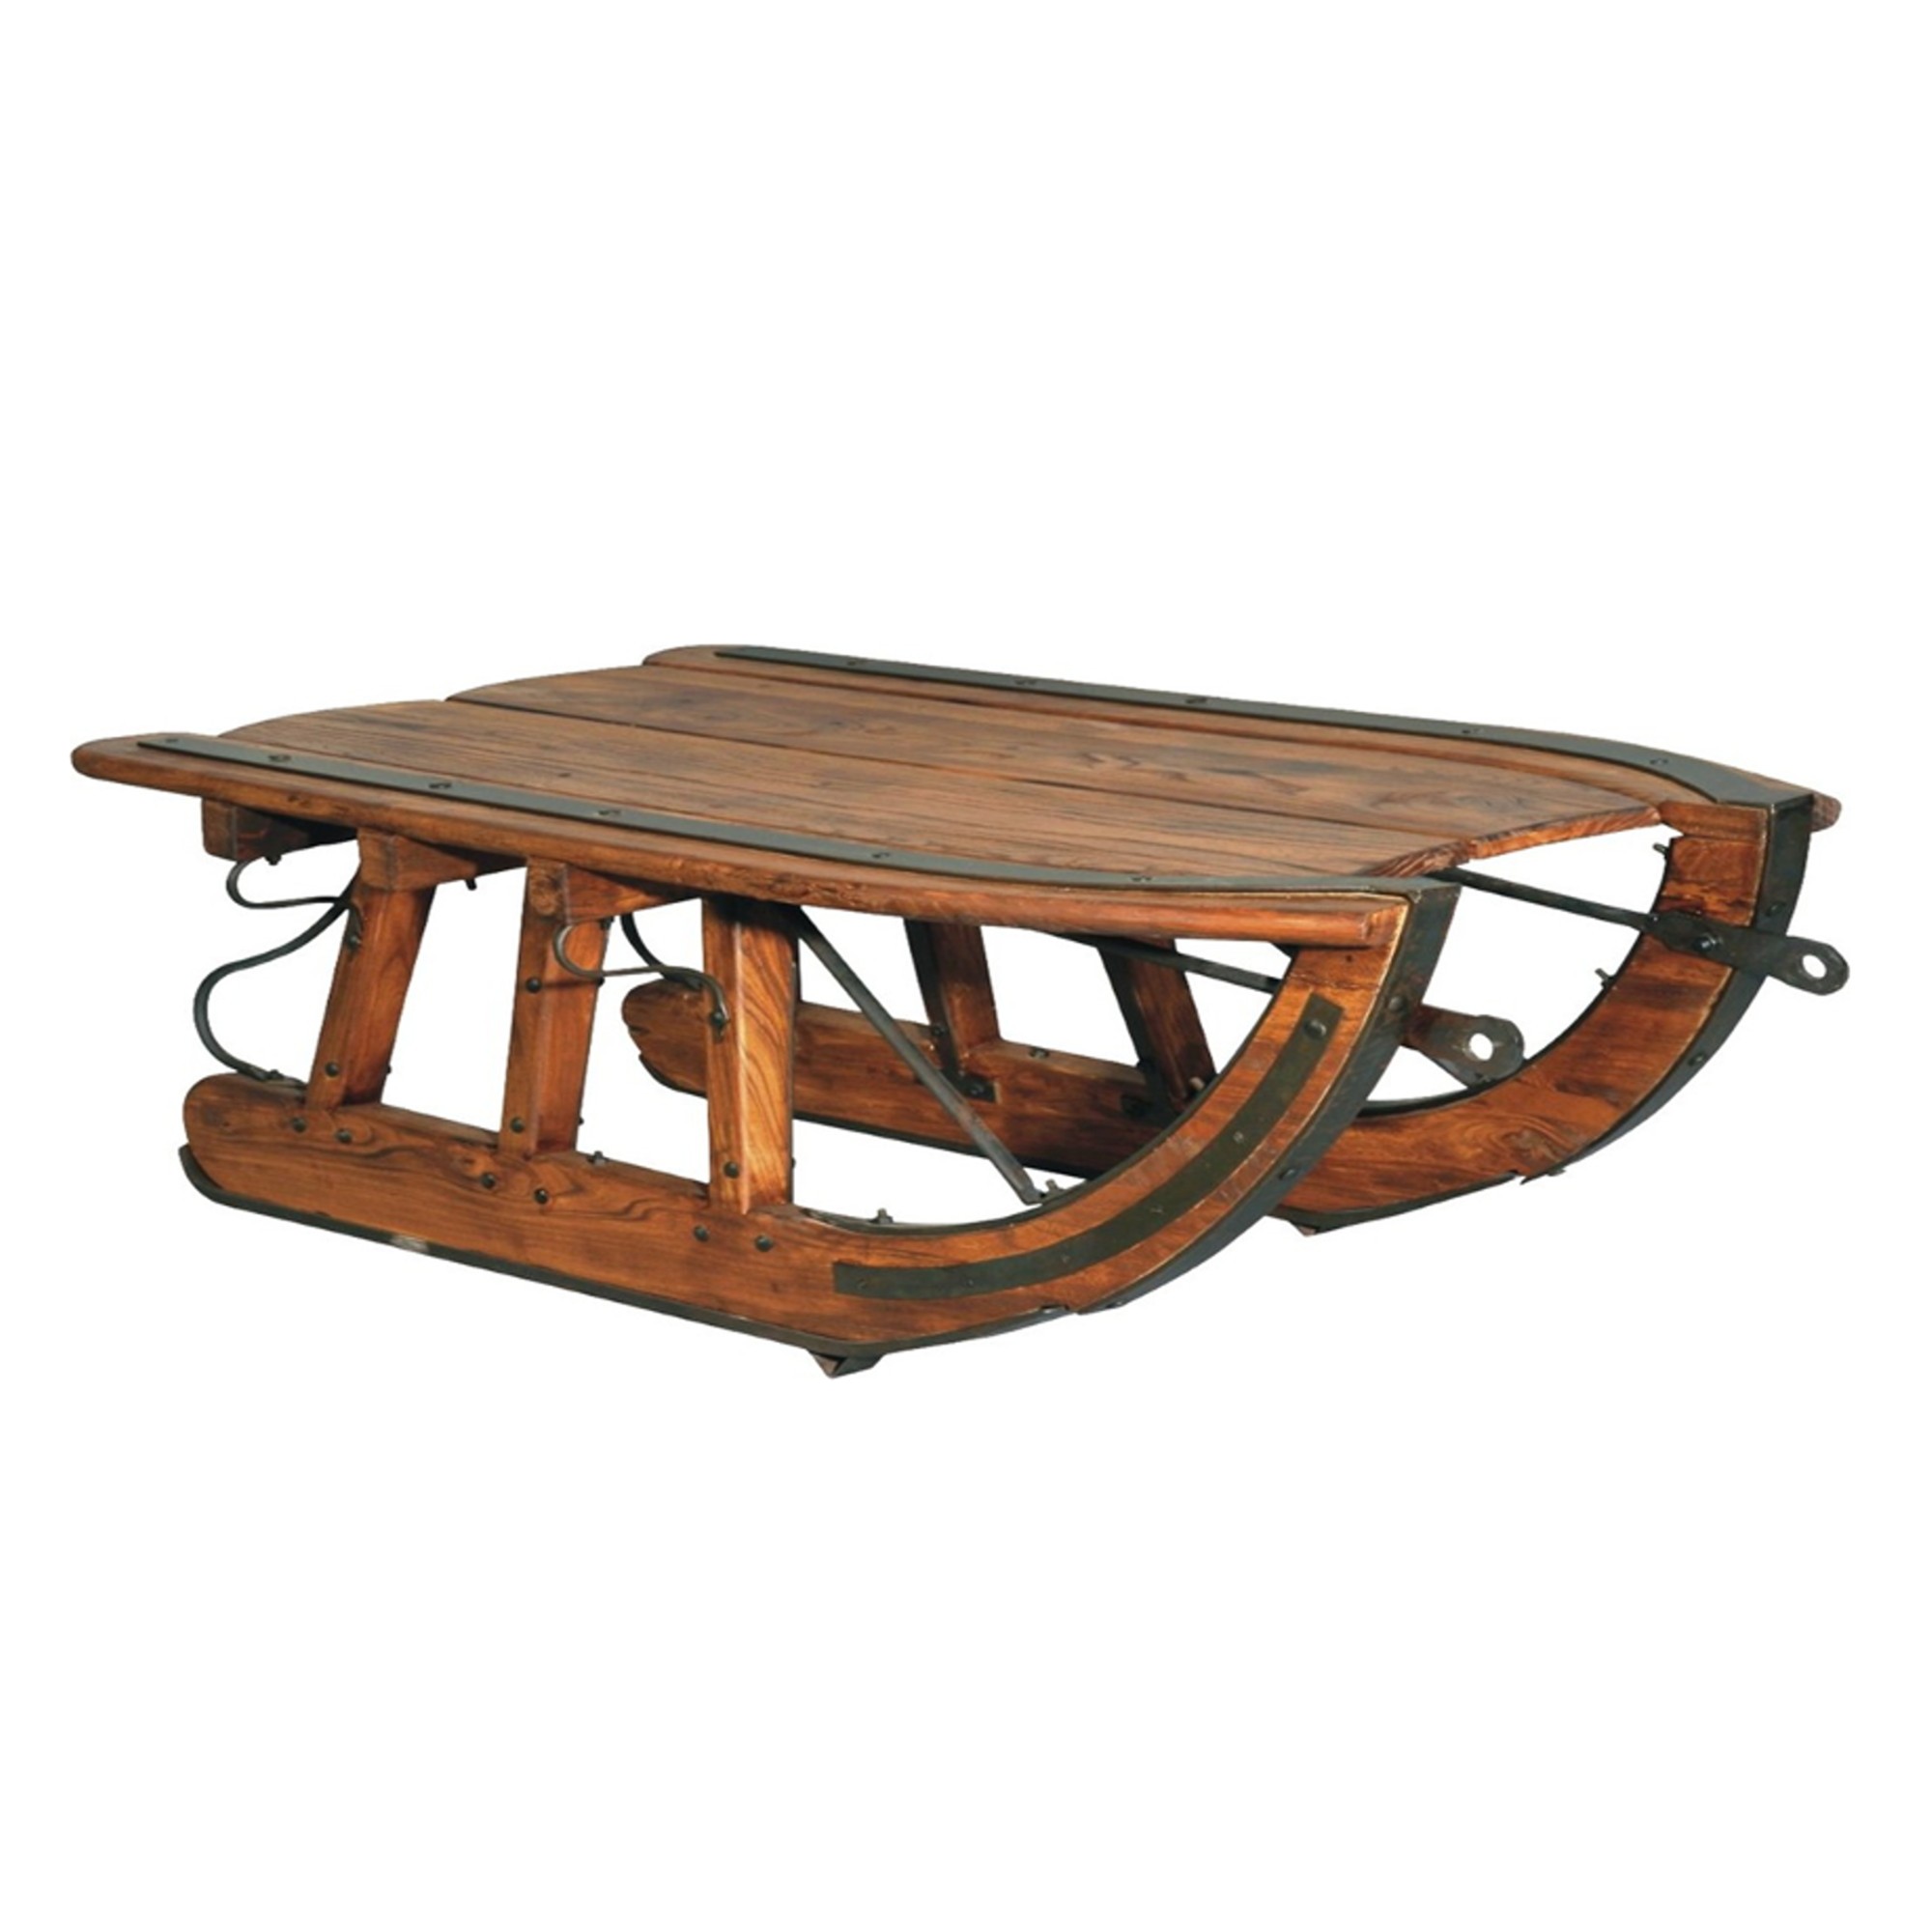 Benches & Tables